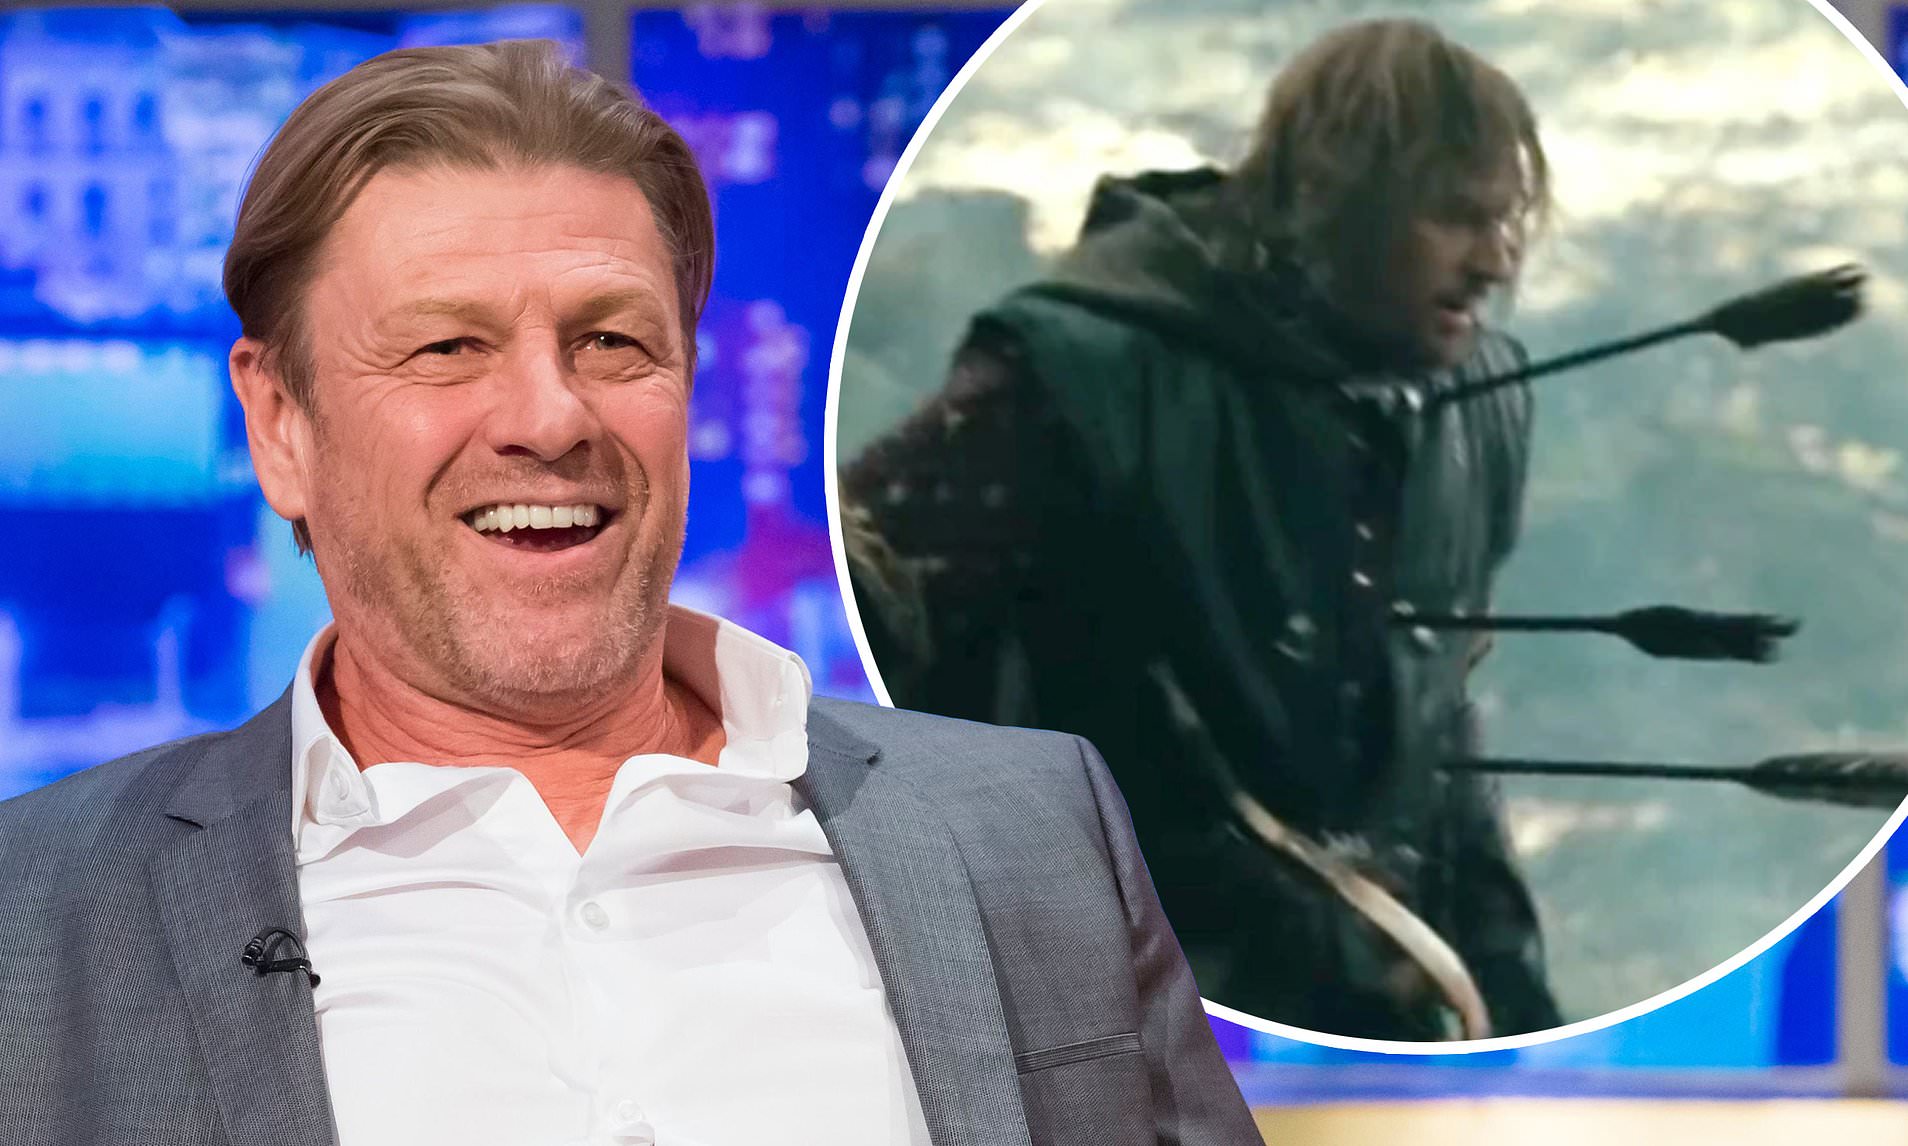 Sean Bean Swaps Heroics for Harsh Reality in New Film 'The Yellow Tie' with John Malkovich